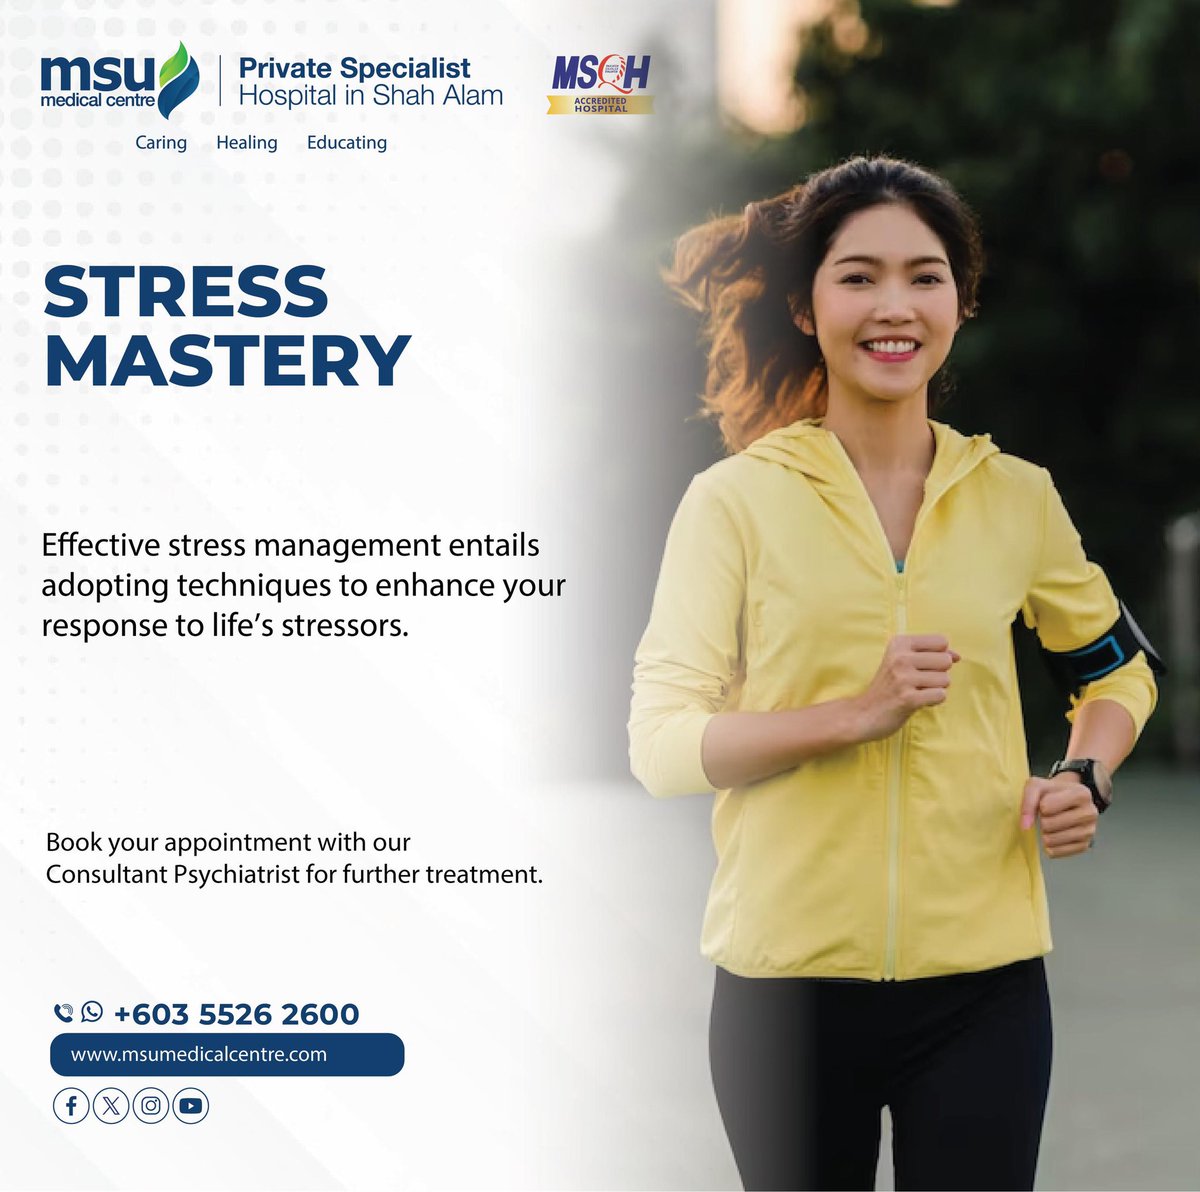 Unhealthy behaviors may eventually result from poorly managed stress. You can receive psychiatrist care at MSU Medical Centre. Visit our website at msumedicalcentre.com or call us at 03-55262600. #CaringHealingEducating #MSUMC #stressrelief